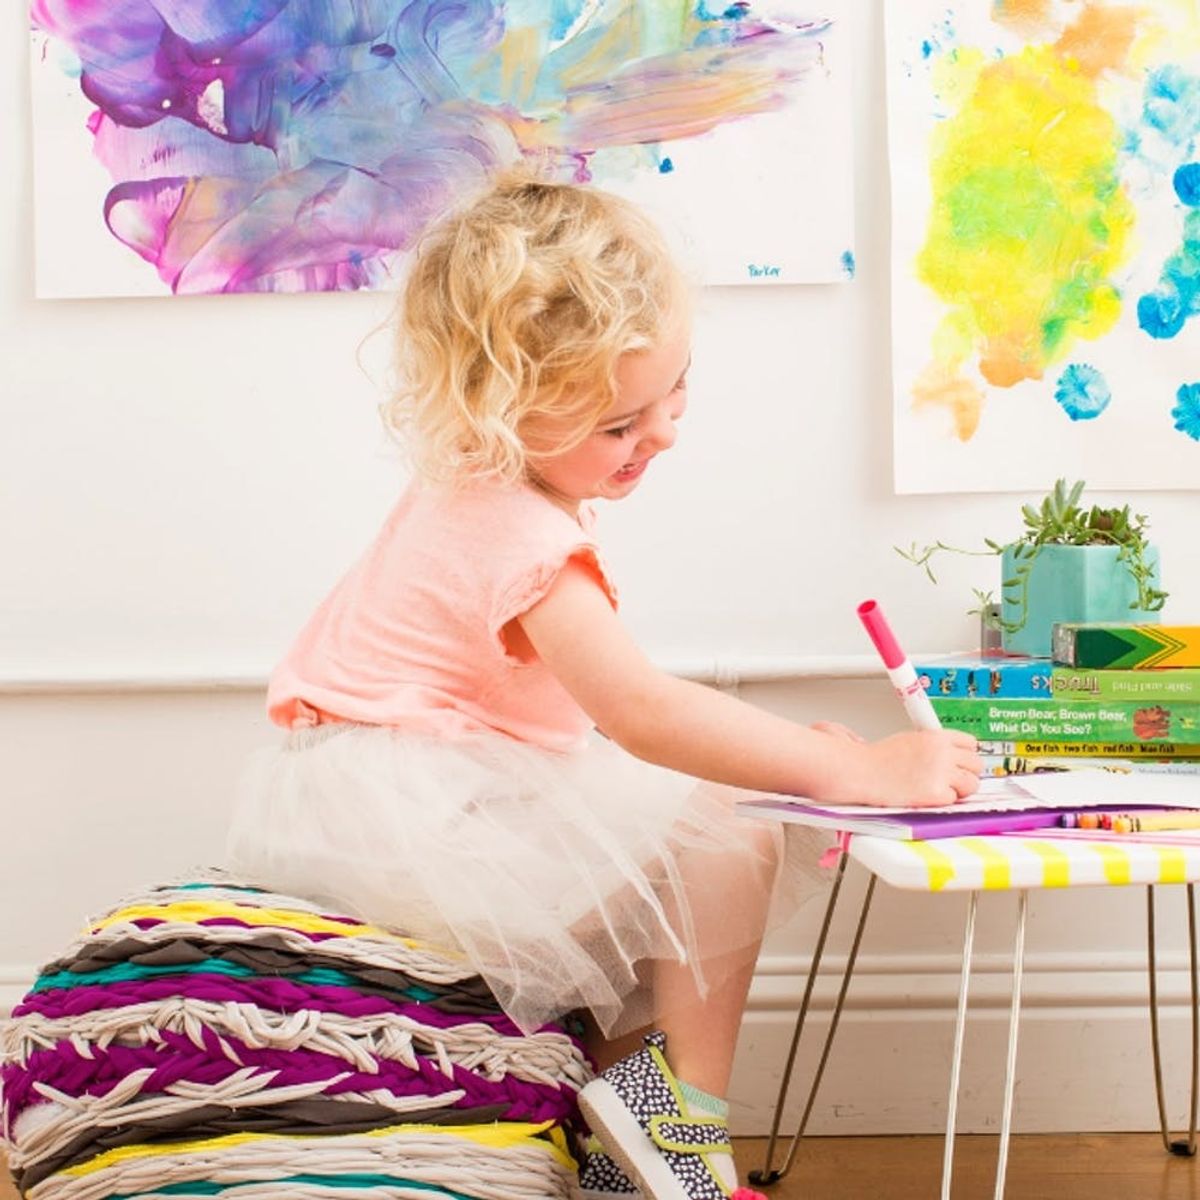 9 Crafty Instagram Accounts That Artsy Families Will Love